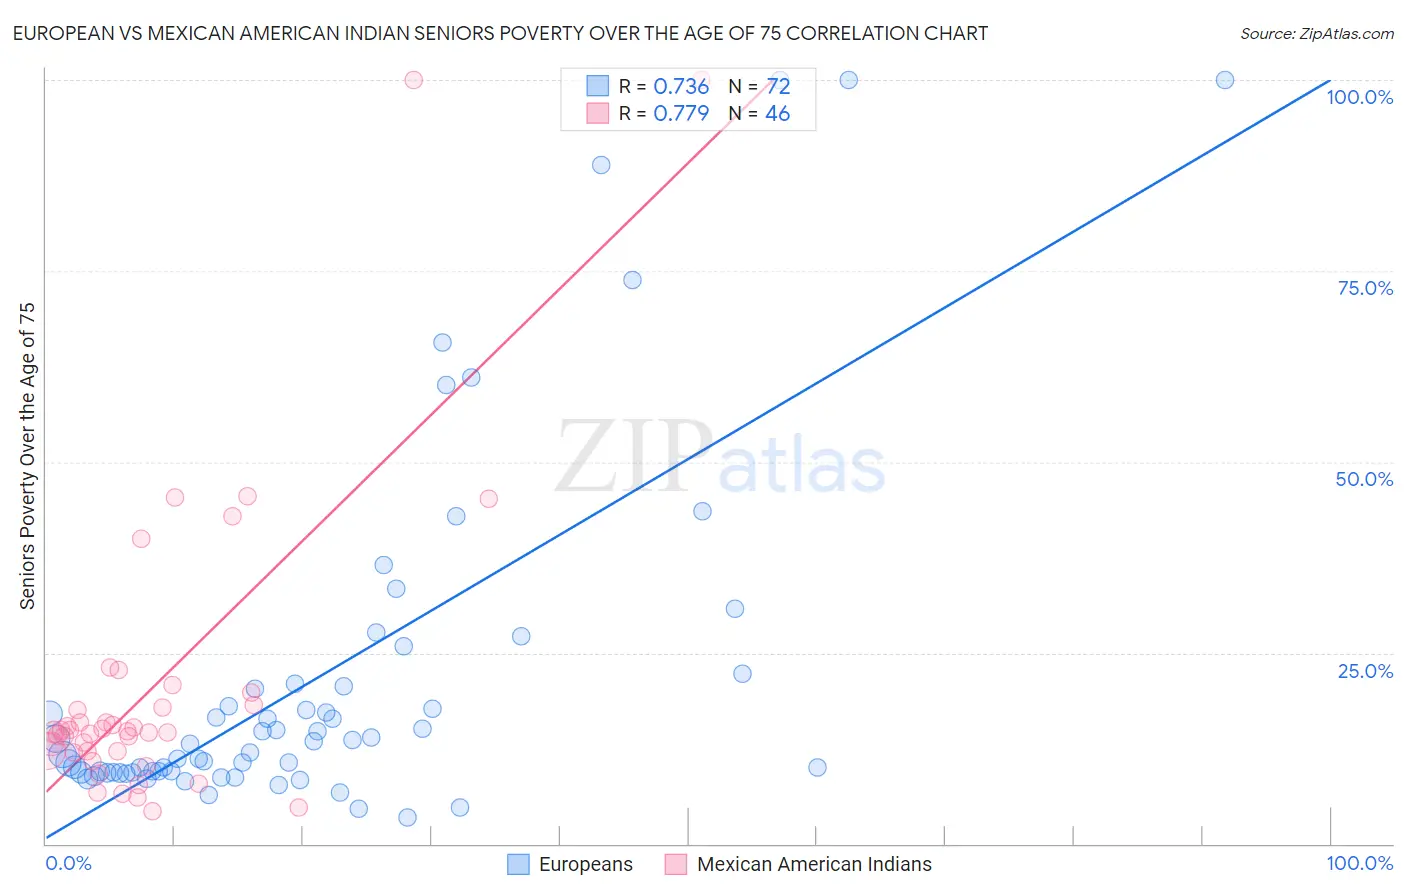 European vs Mexican American Indian Seniors Poverty Over the Age of 75